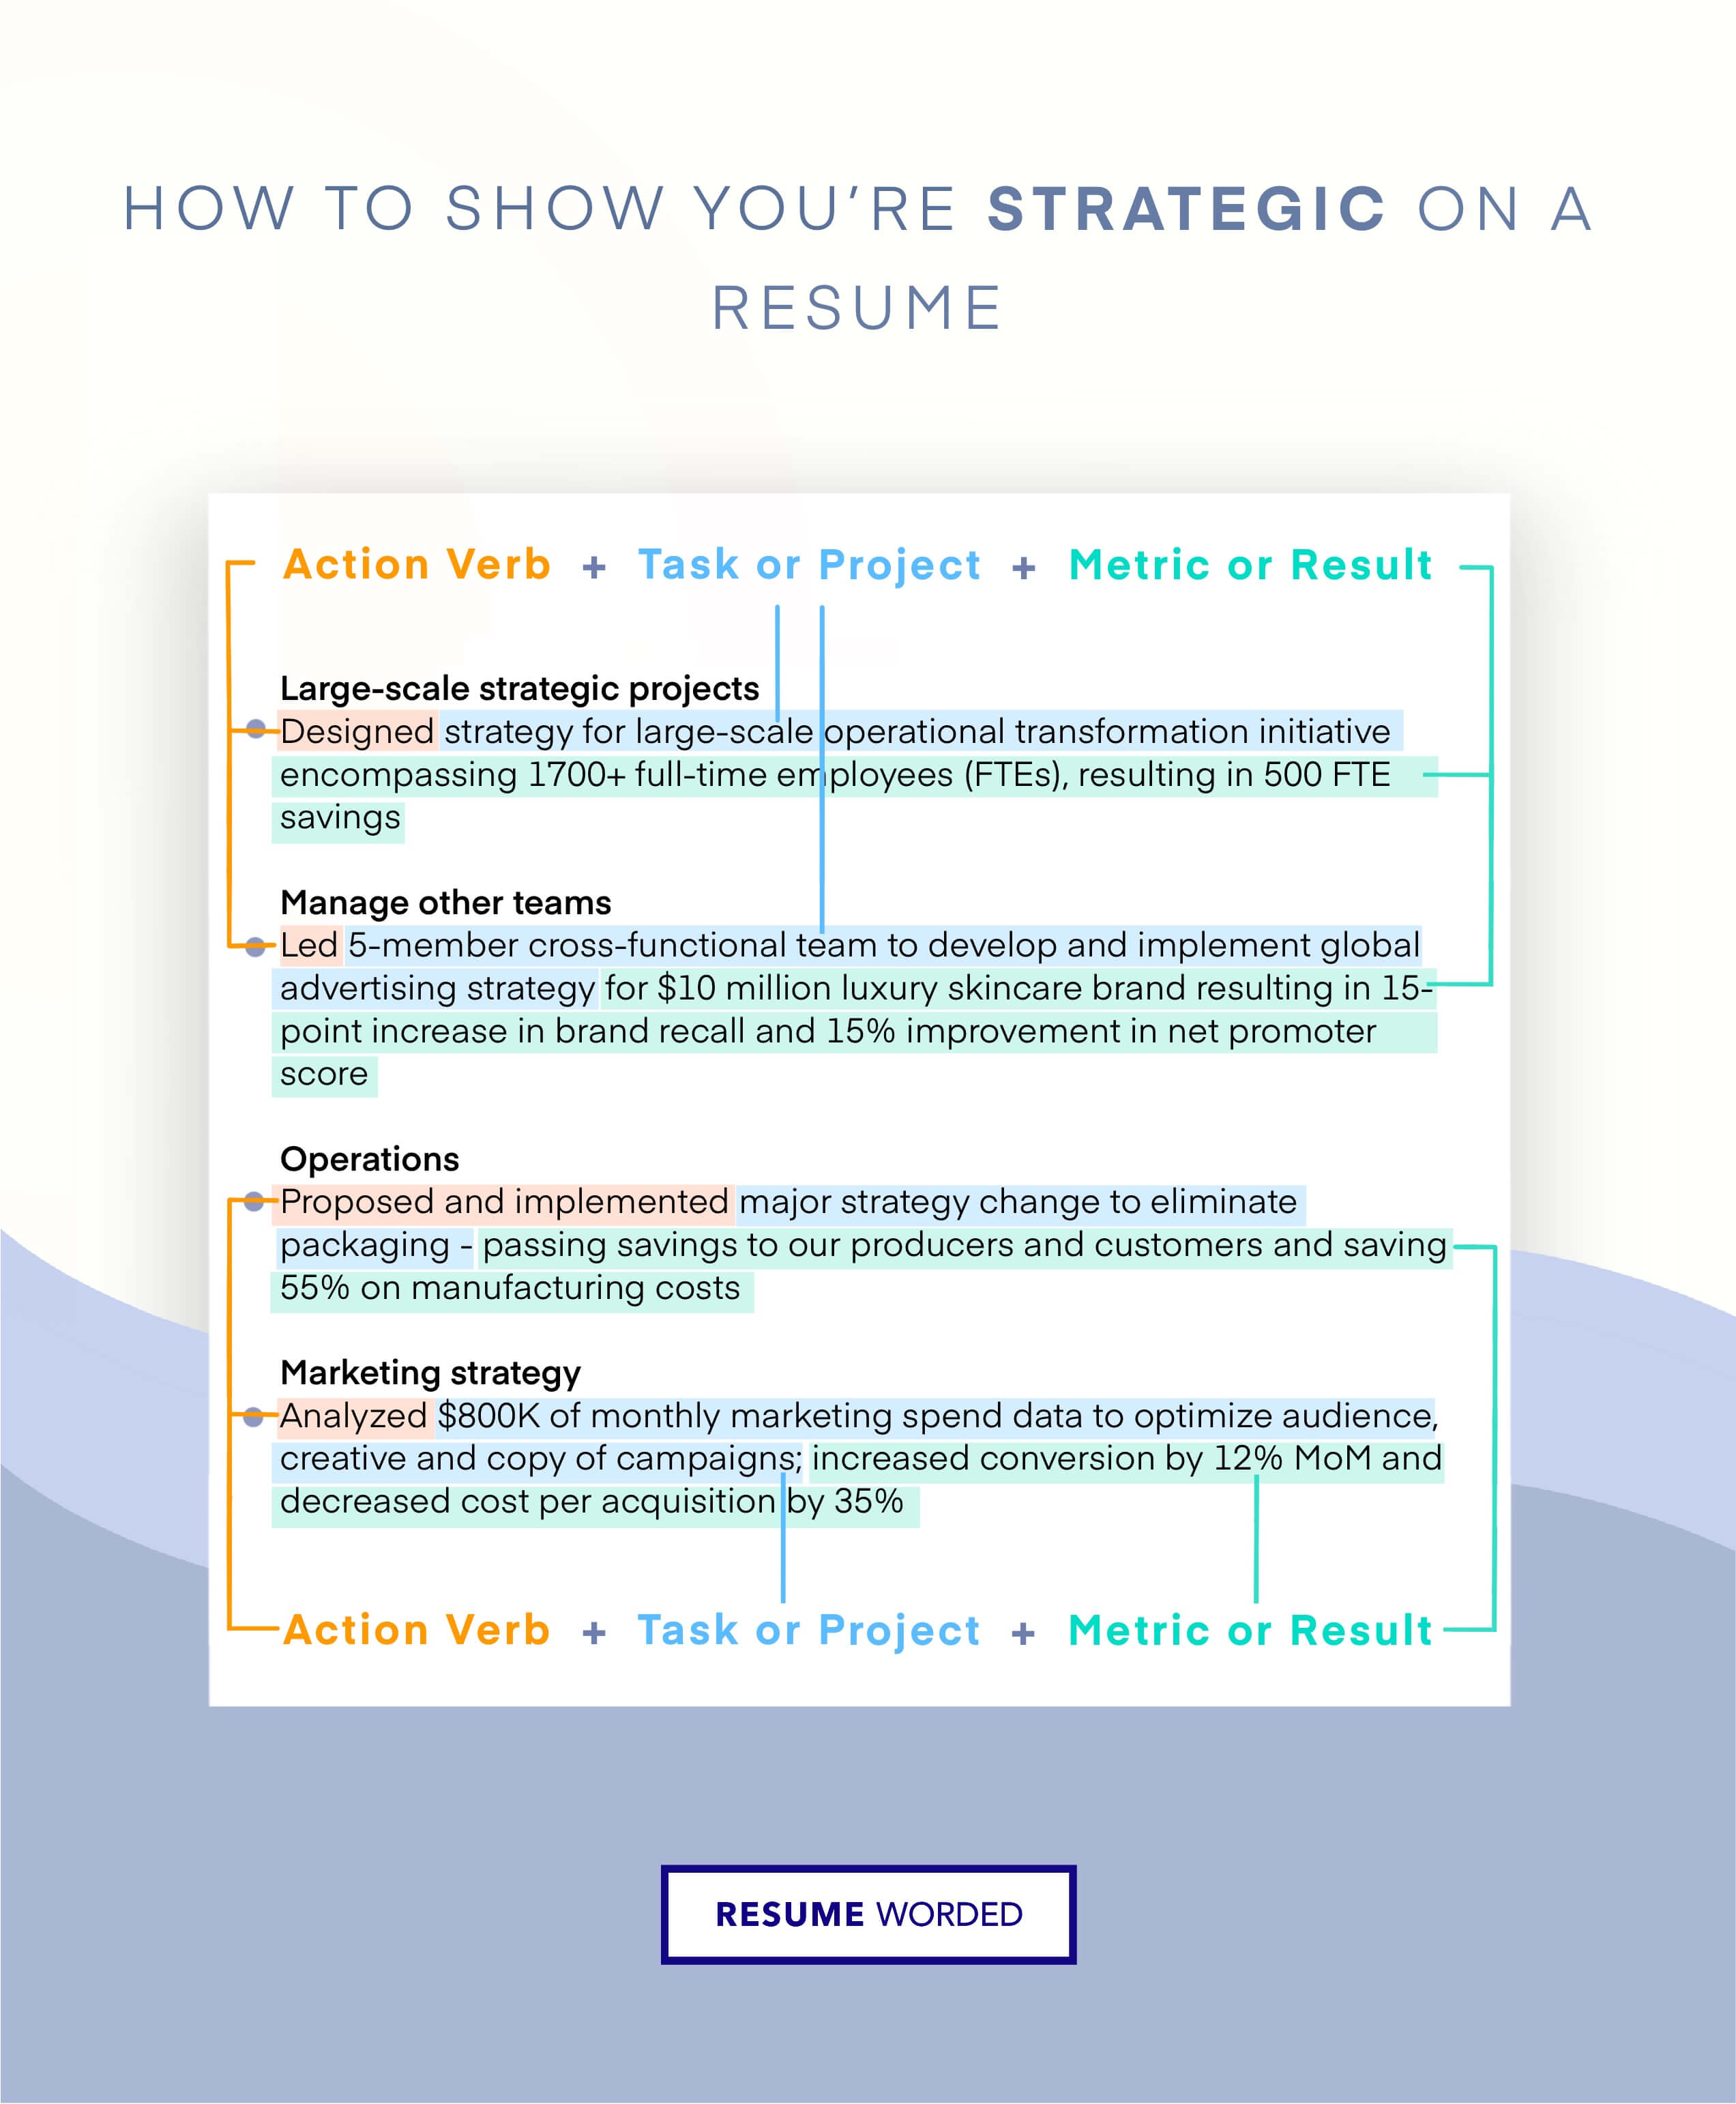 Showcase your familiarity with recent recruitment strategies - Full Cycle Recruiter CV